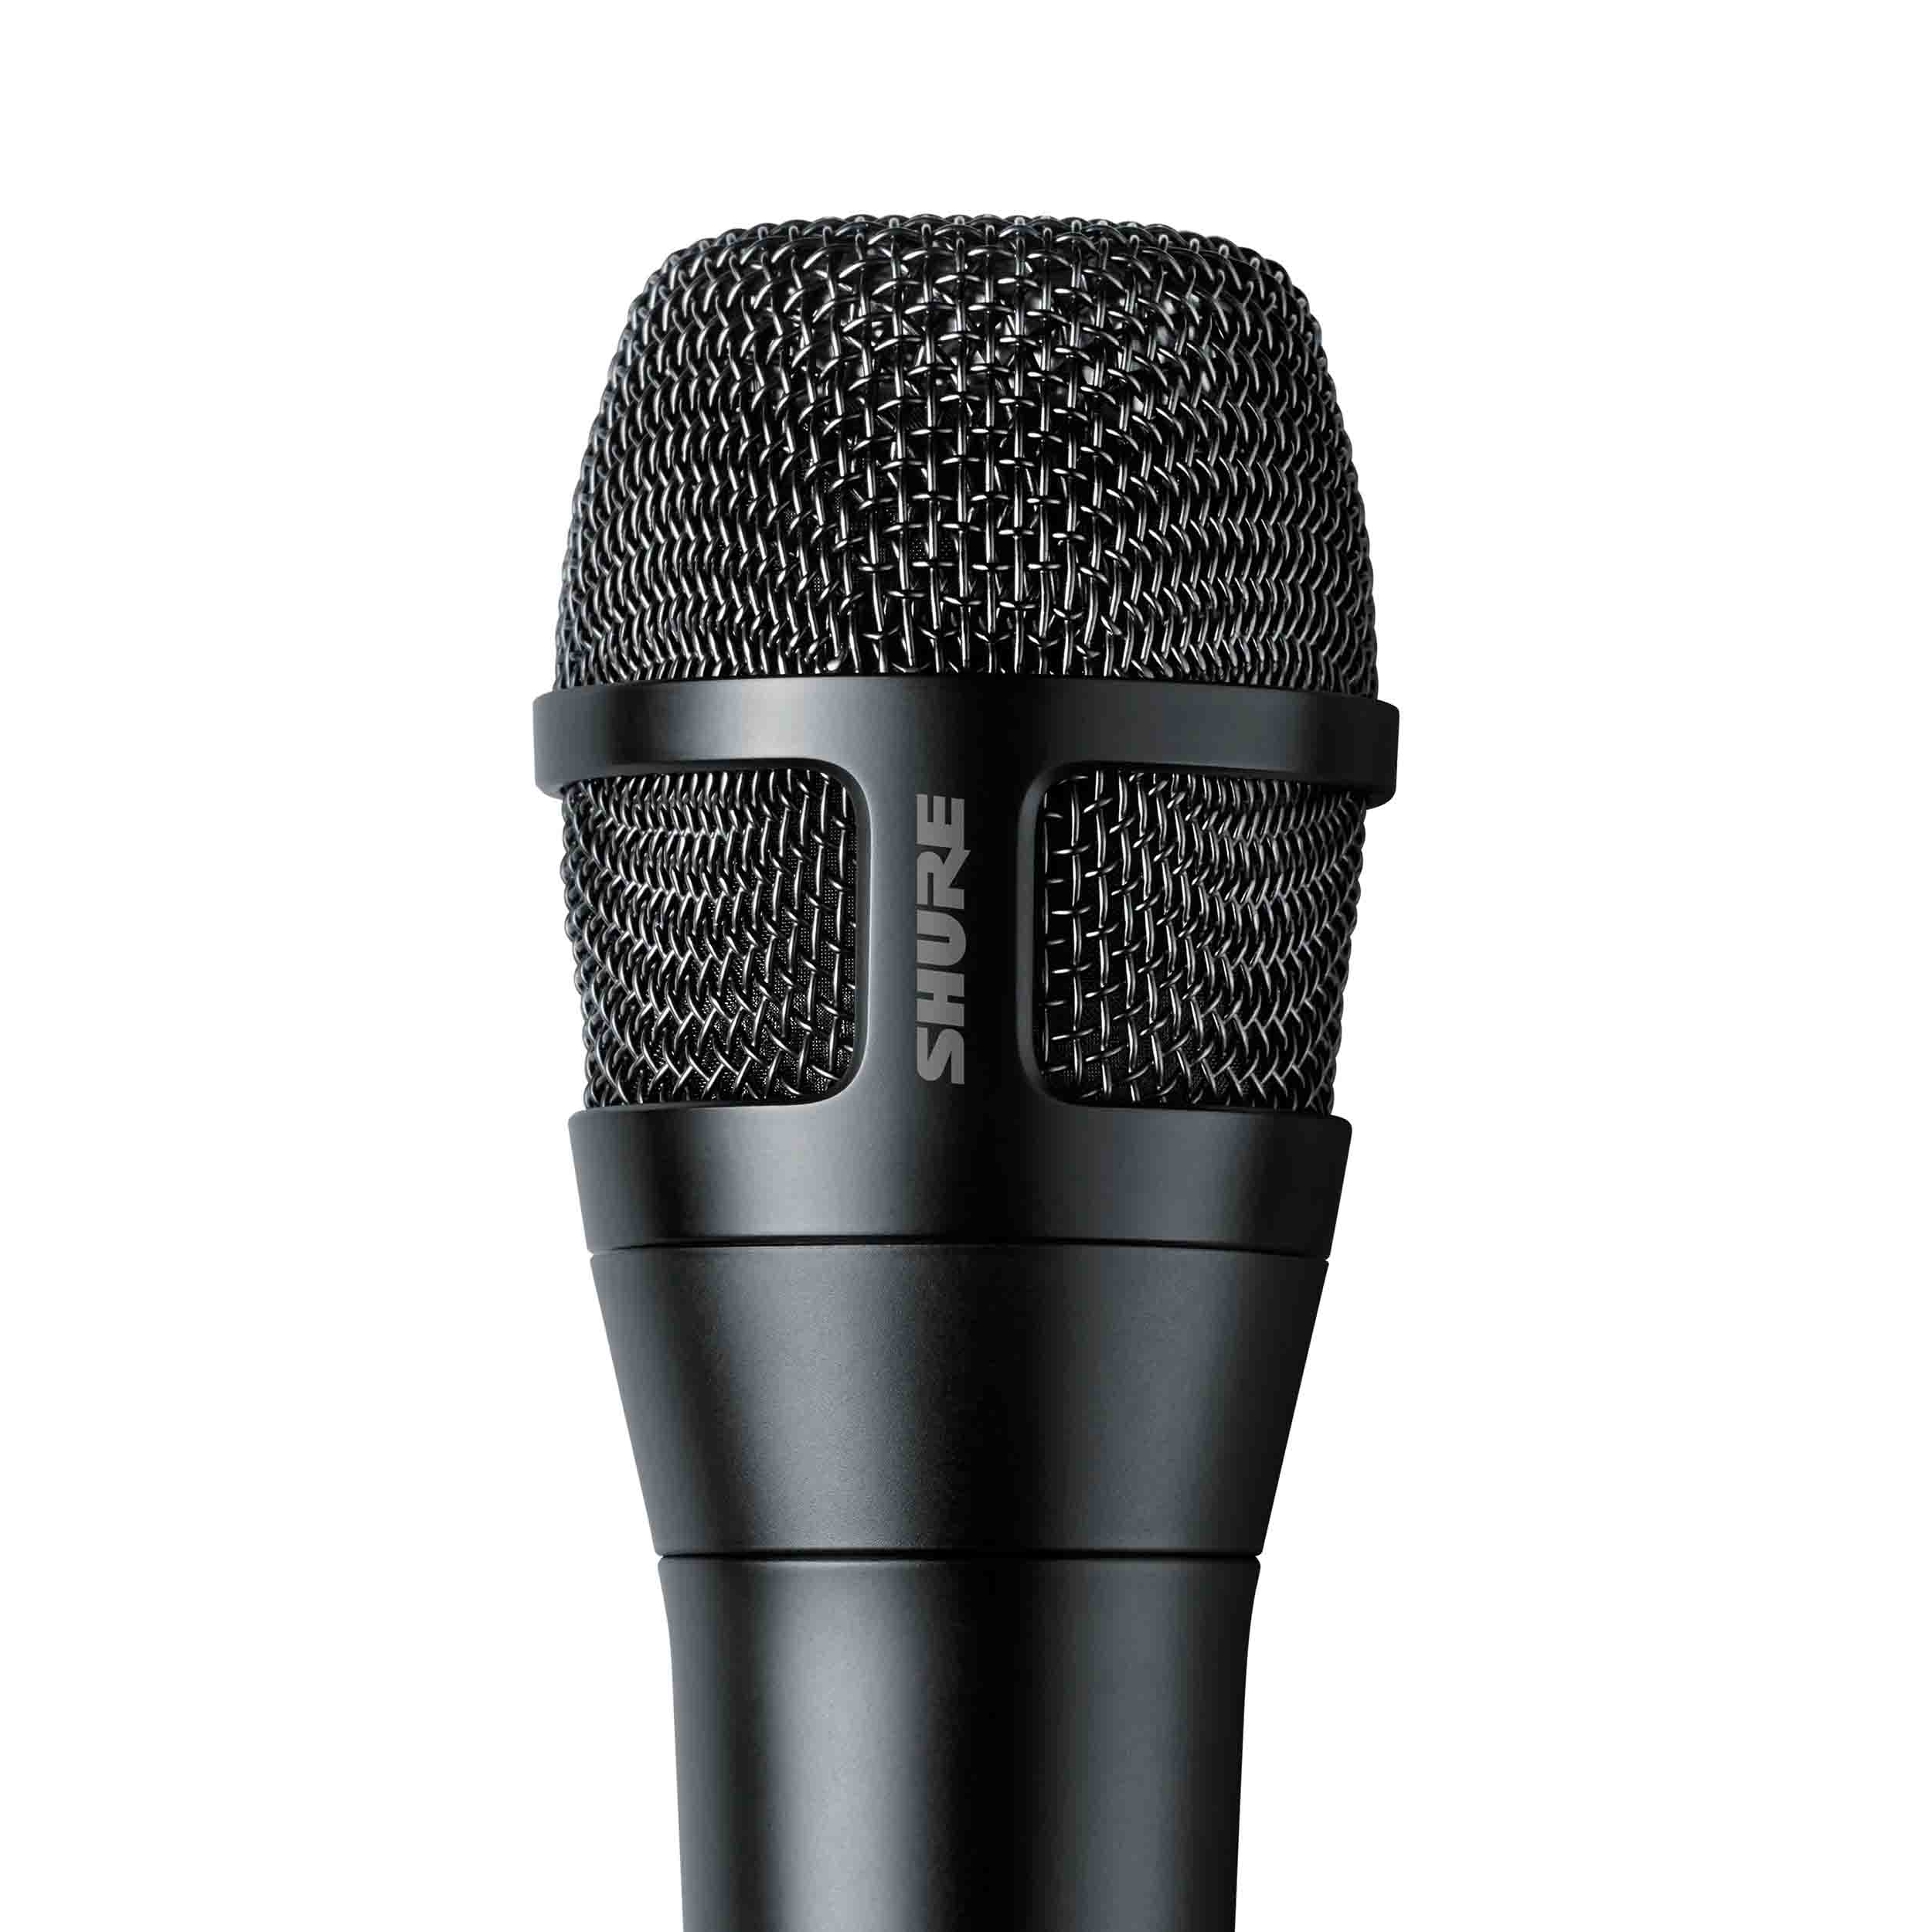 Shure Nexadyne 8/C Cardioid Dynamic Vocal Microphone with Revonic Transducer - Black by Shure